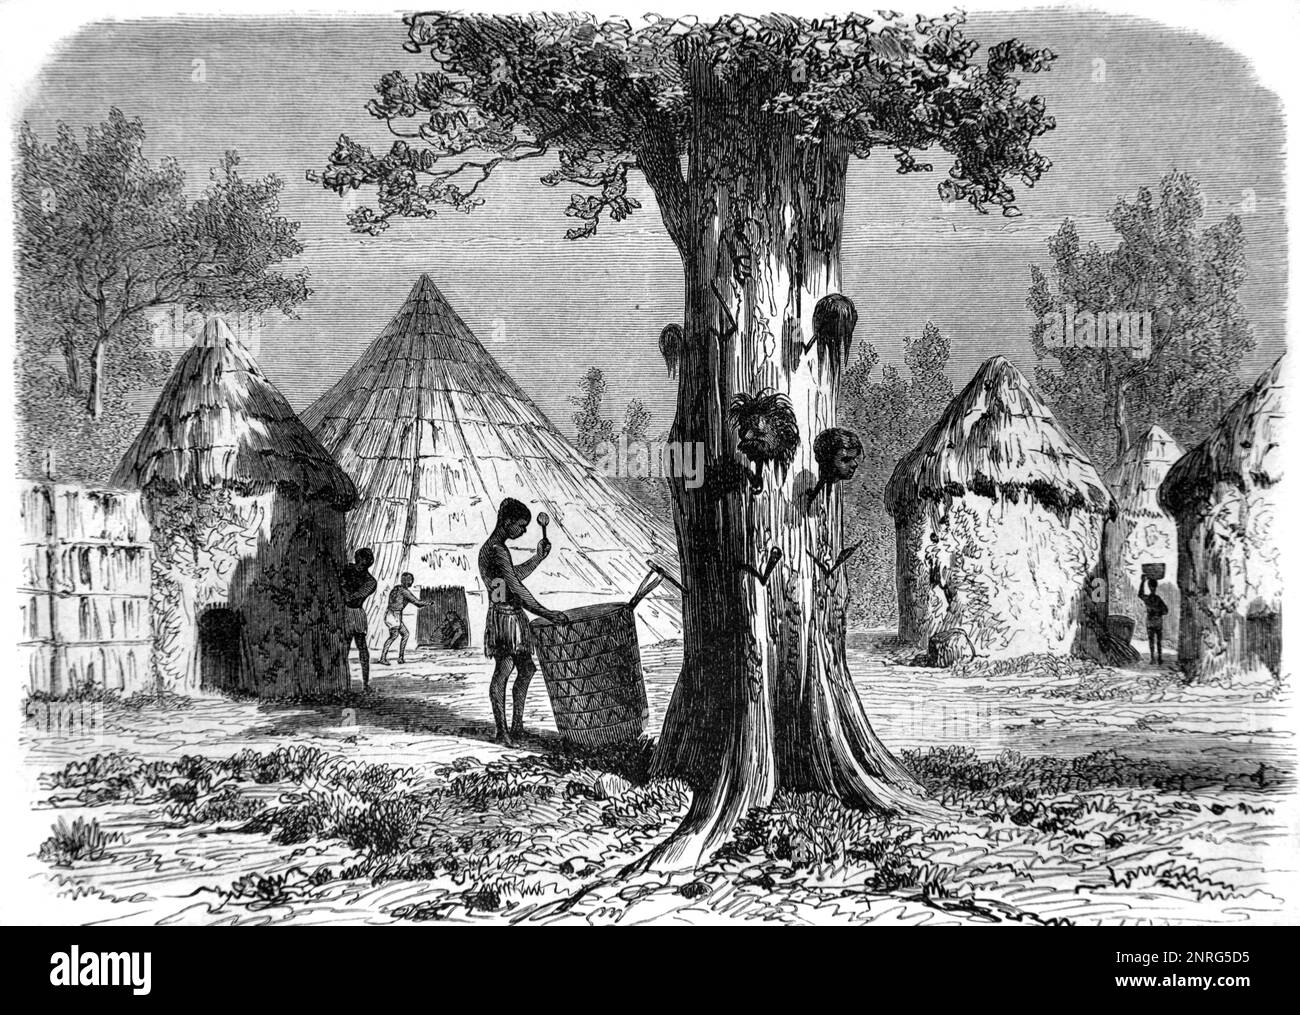 War Tree or Trophy Tree Hung with Severed Heads of Rival Tribe in Nuer Village or African Village of Round Mud Huts in the White Nile Region of  South Sudan Africa. Vintage Engraving or Illustration 1862 Stock Photo